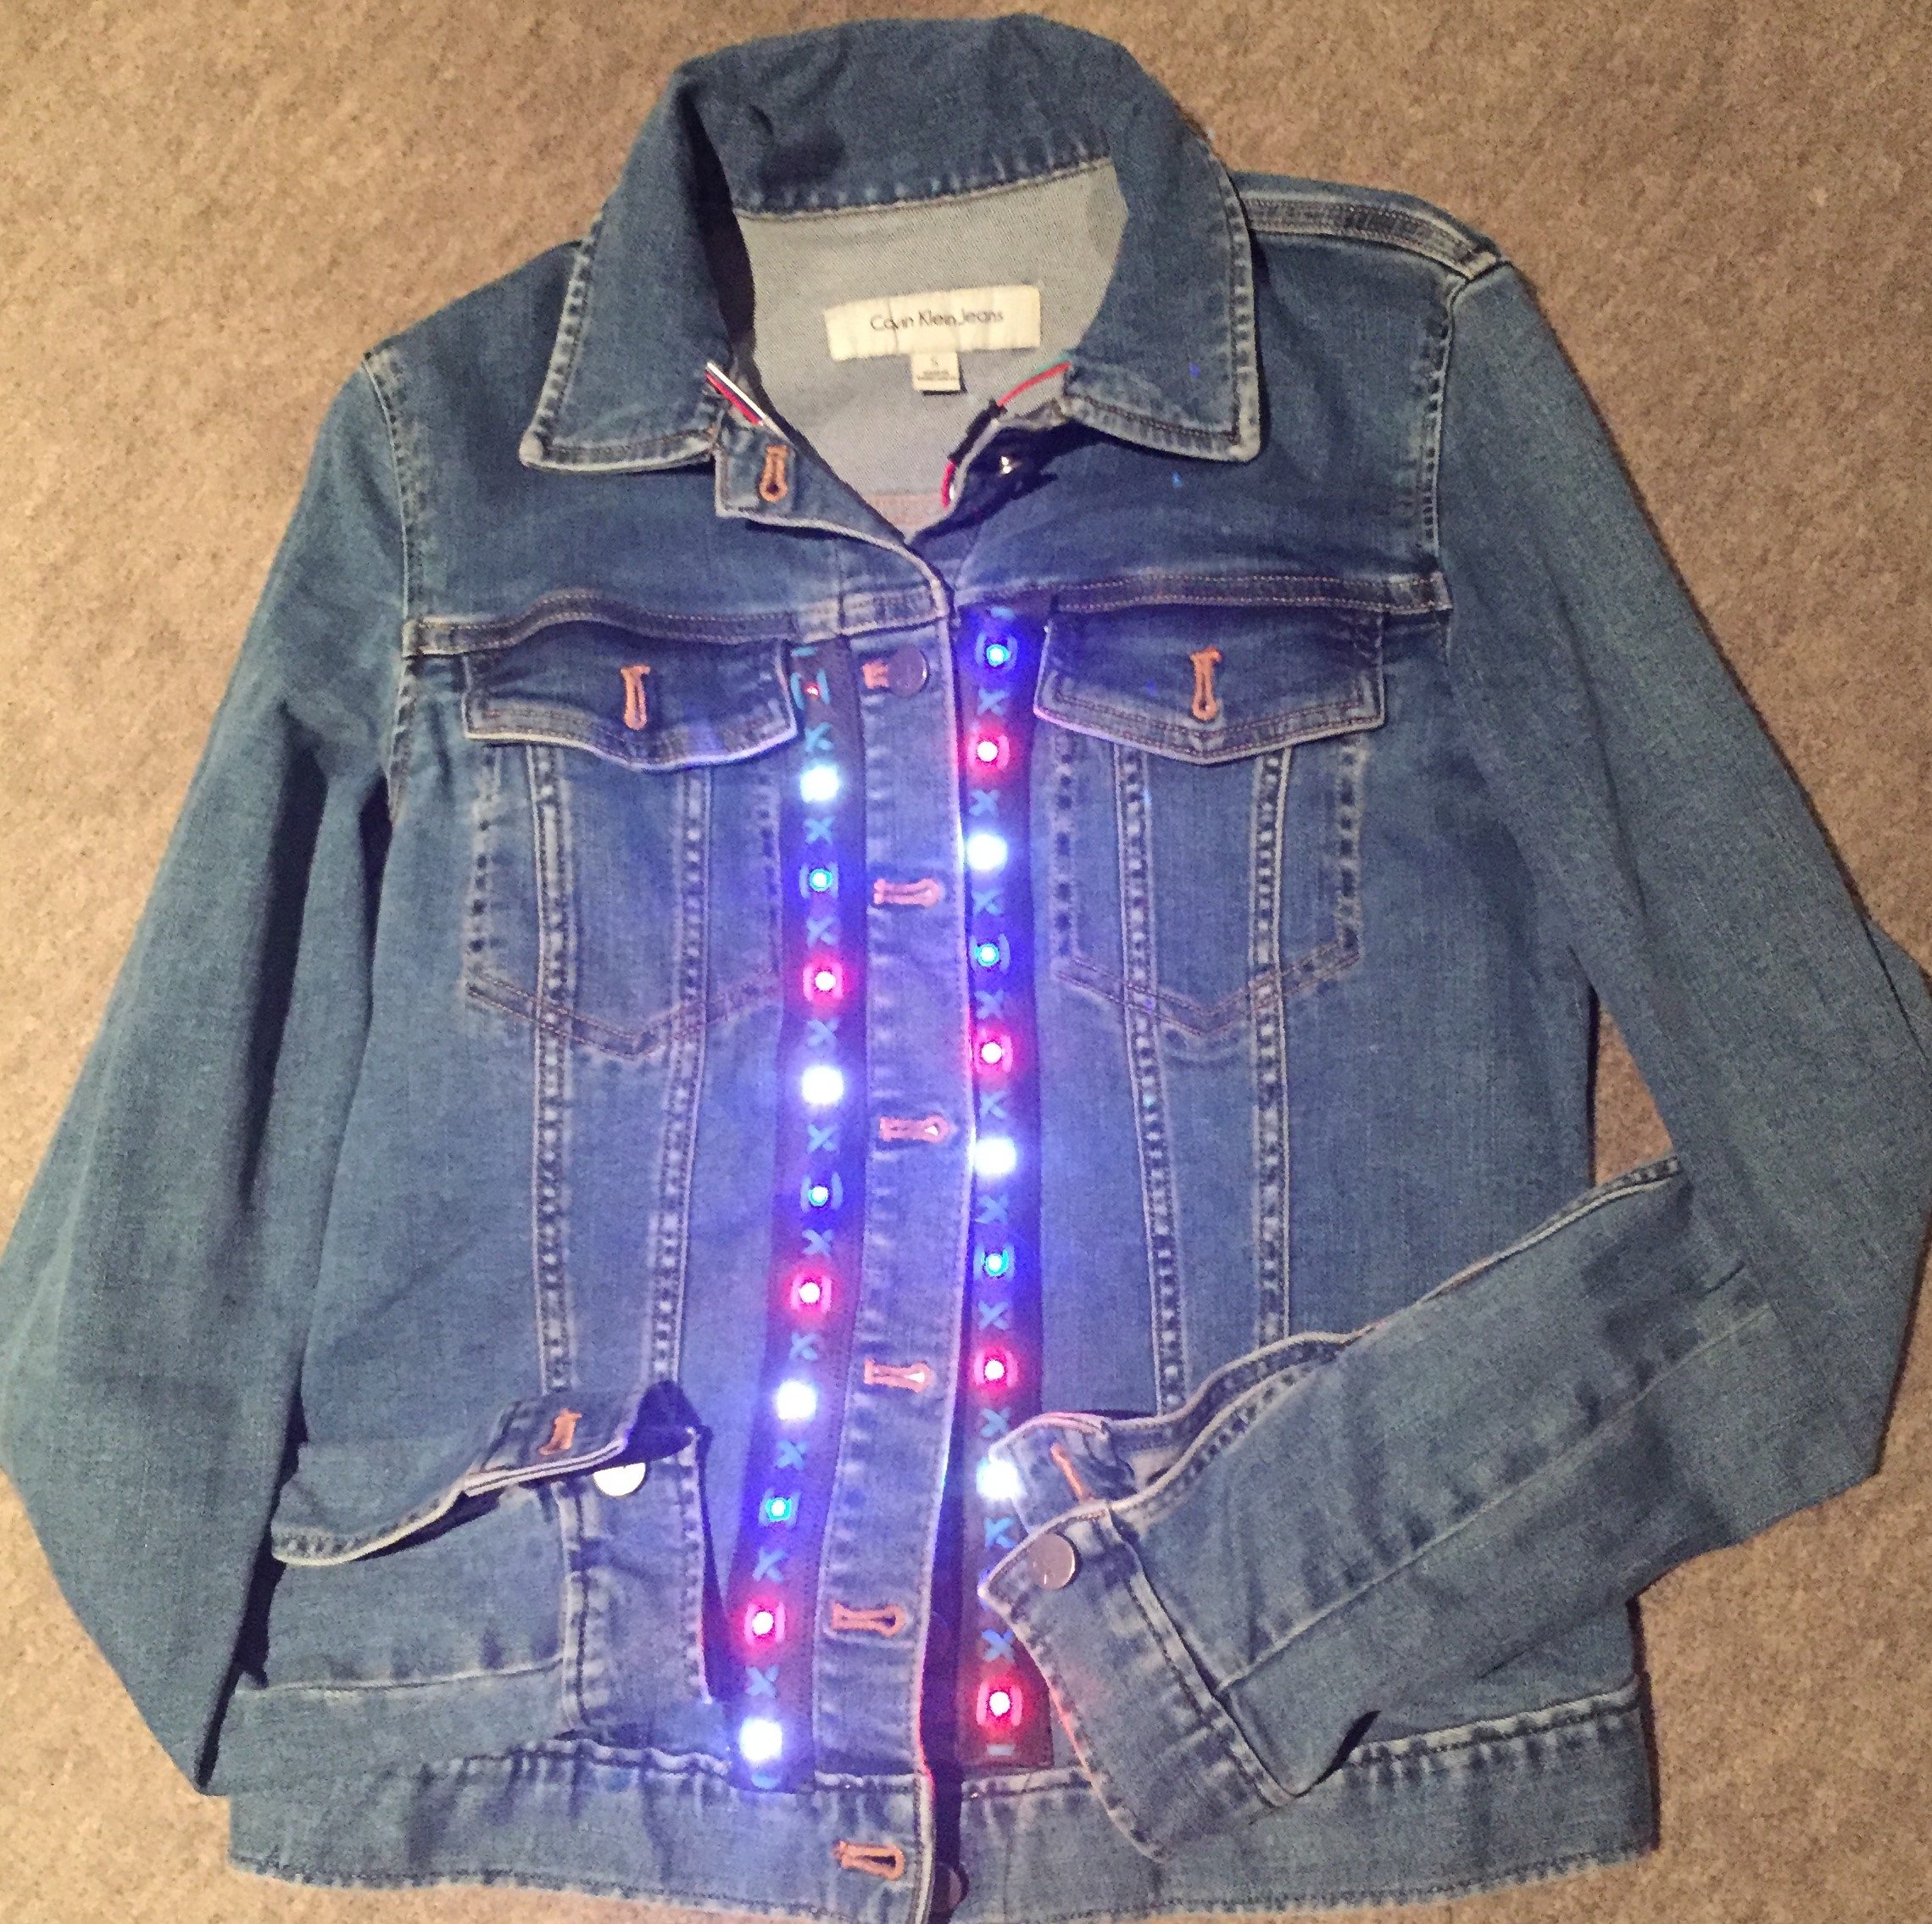 Bright Wearables: Adding LEDs to Everyday Clothing and Accessories